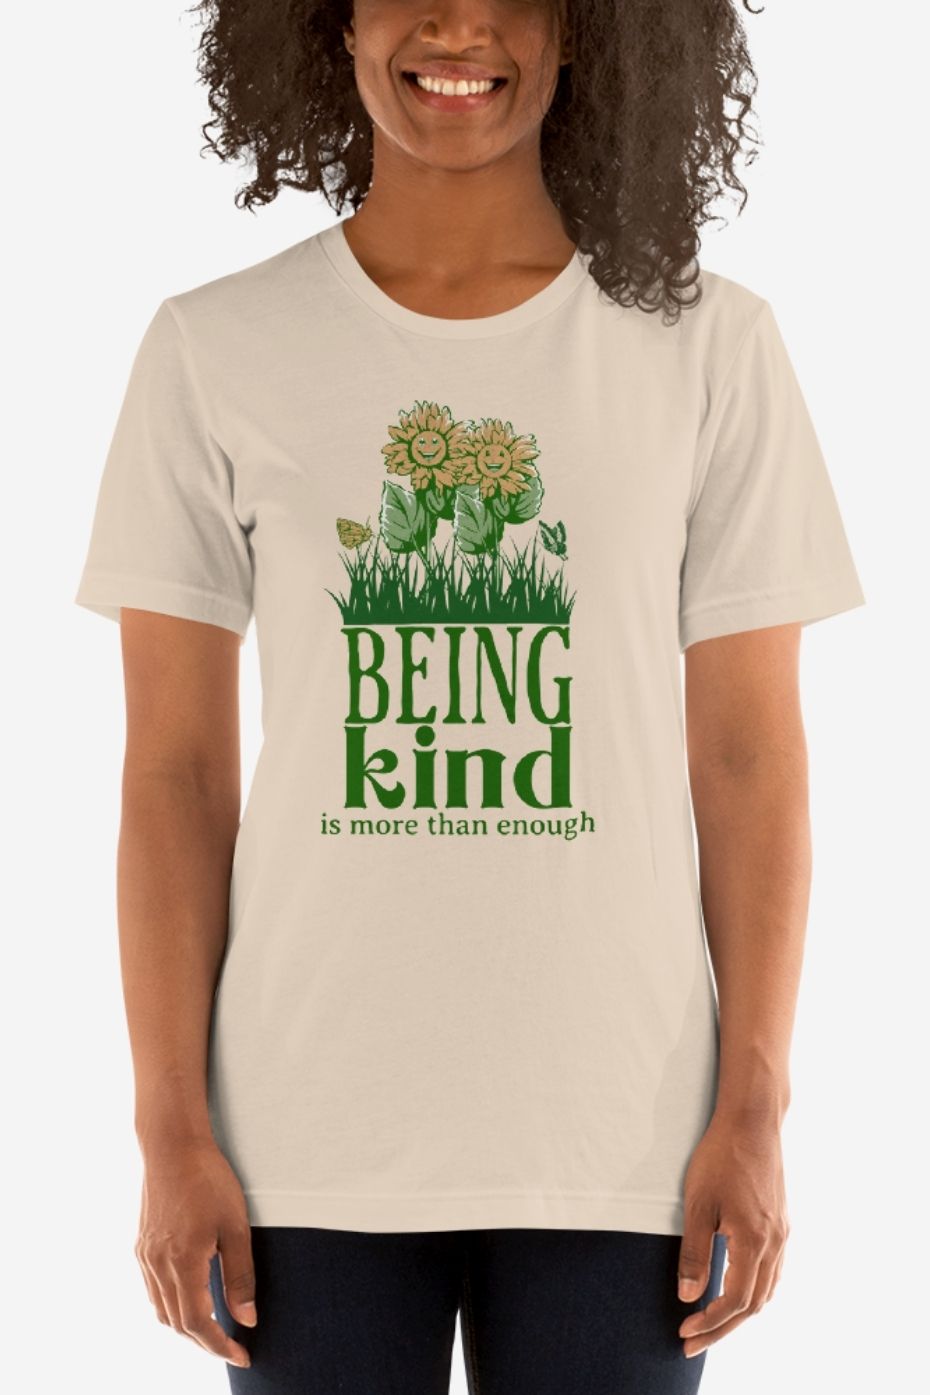 Being Kind is More Than Enough - Unisex t-shirt